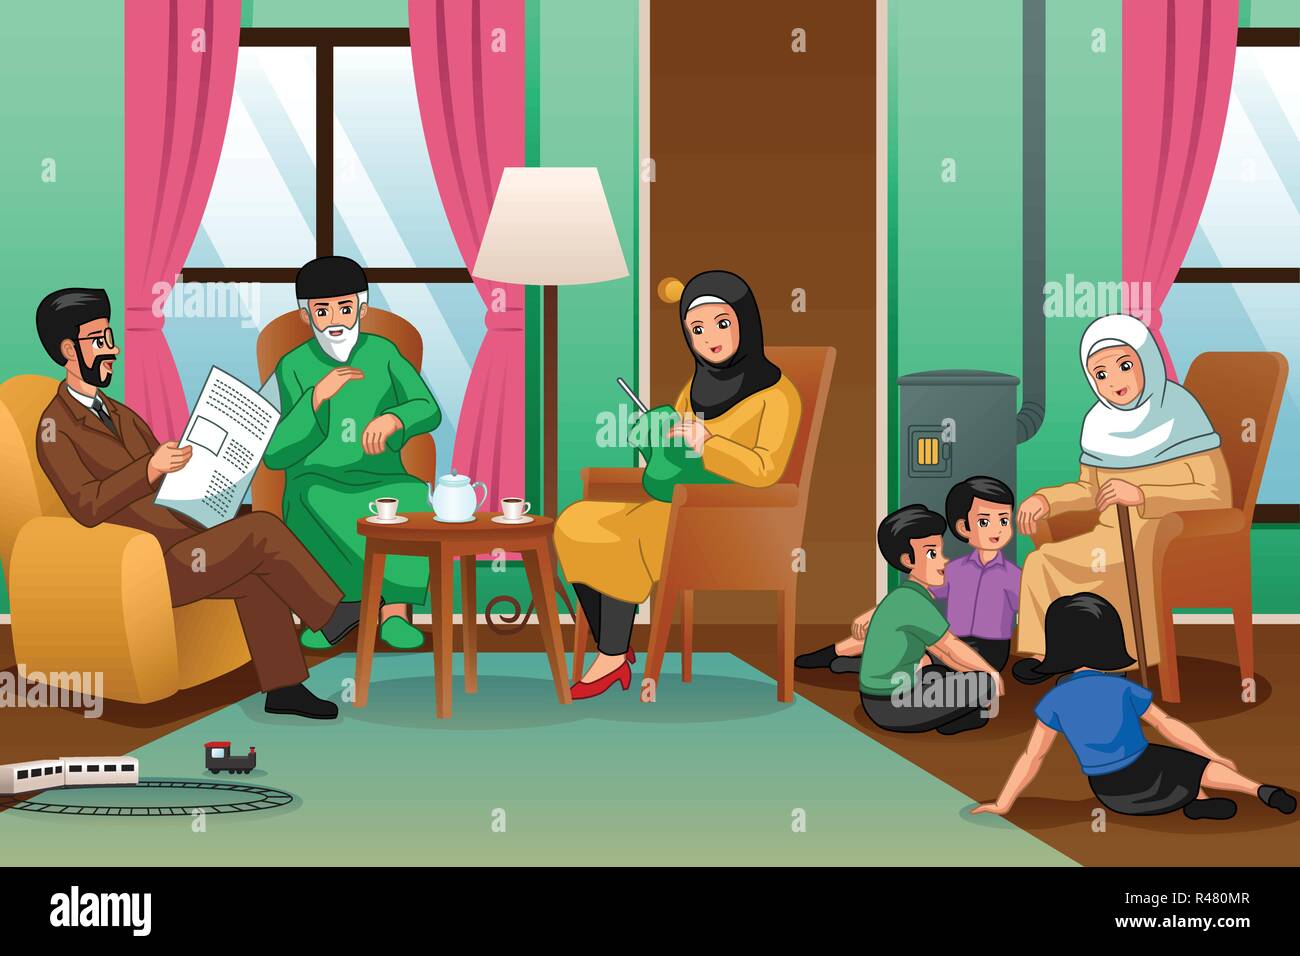 A vector illustration of Muslim Family at Home Stock Vector